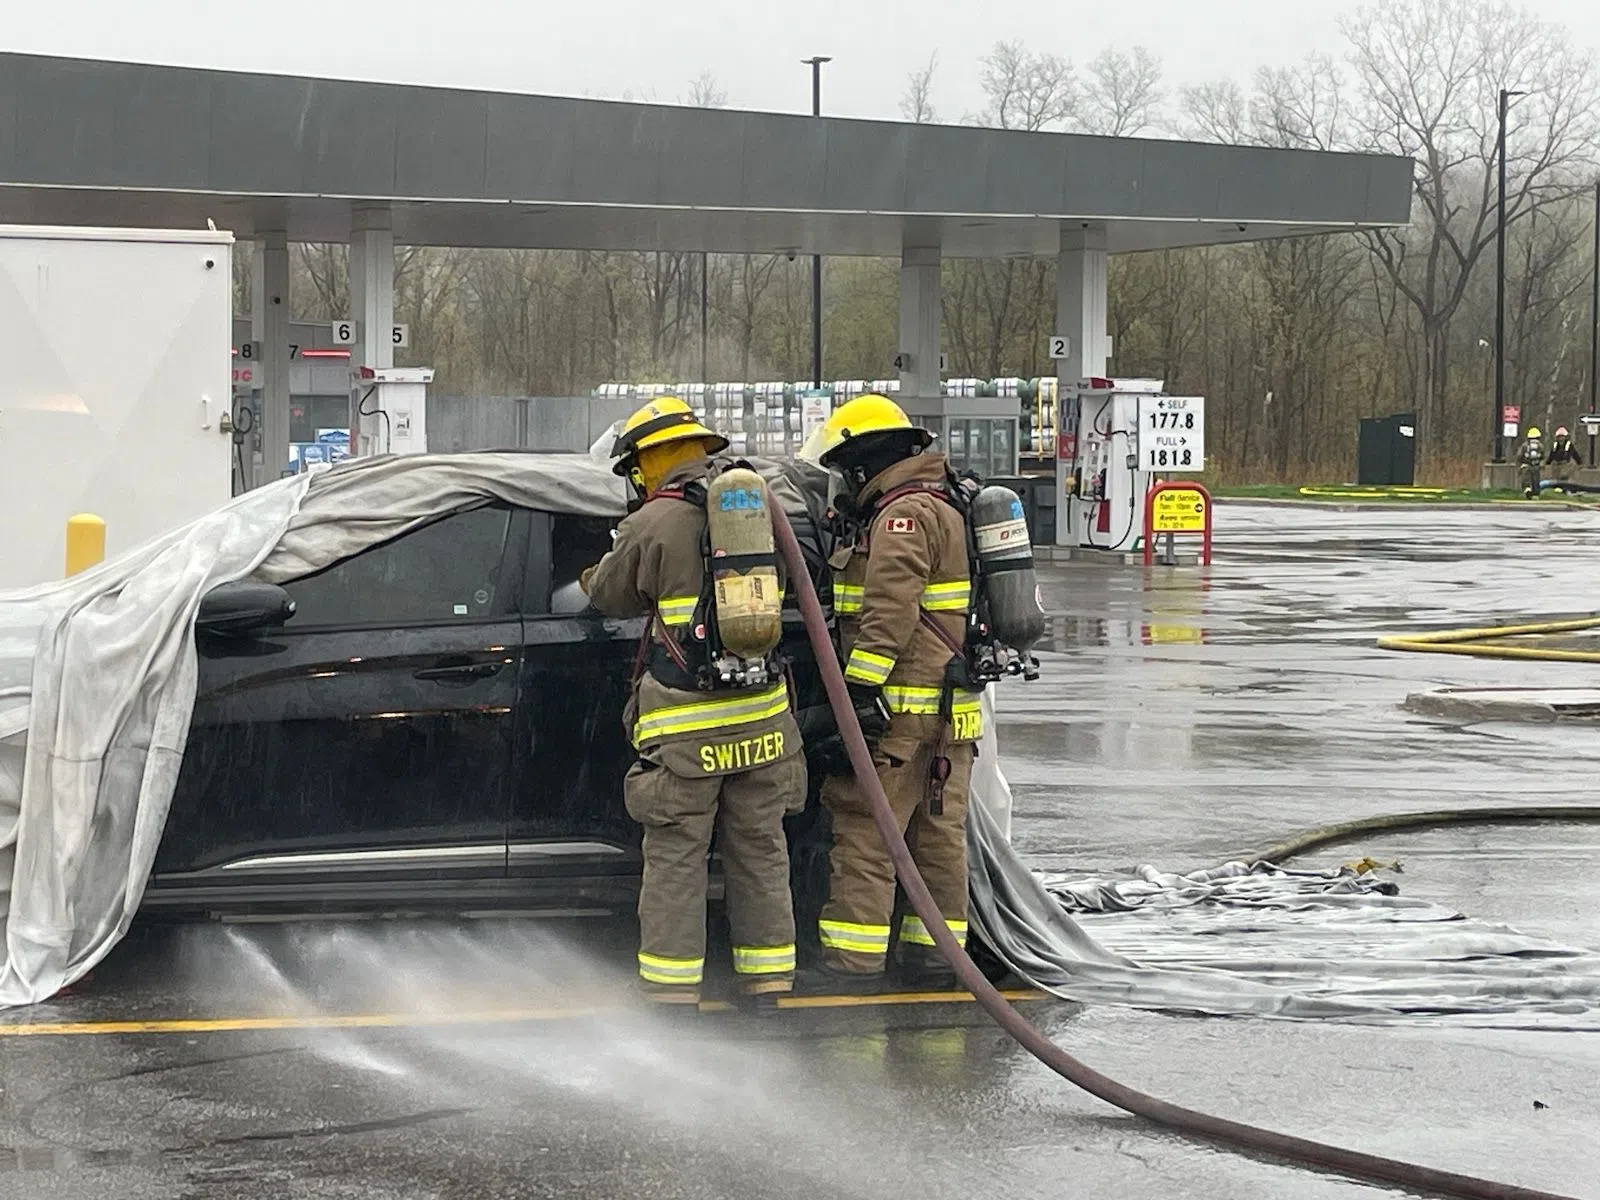 Electric vehicle burns at Trenton ONroute